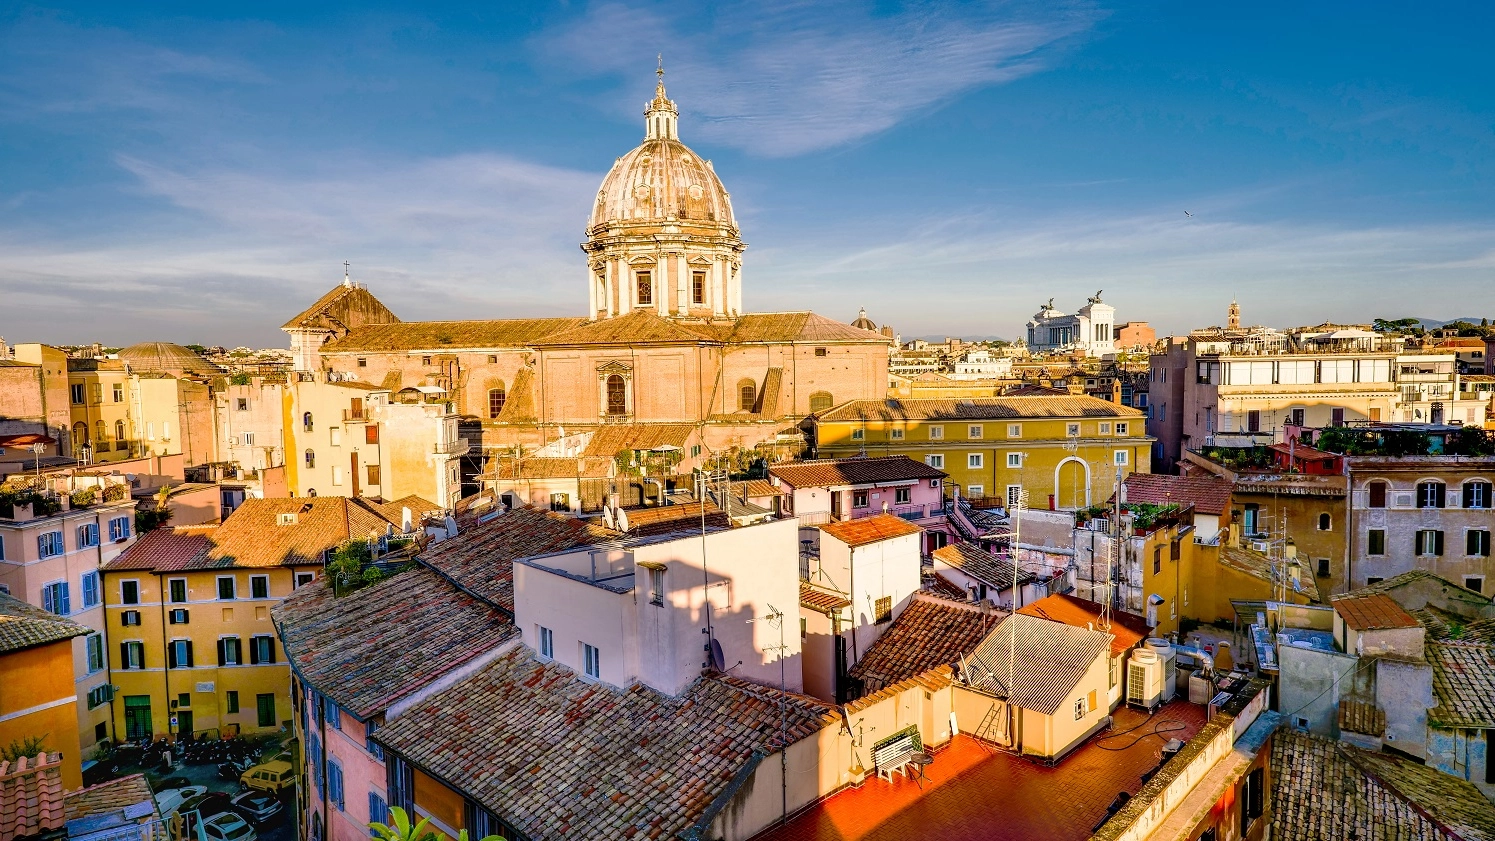 An intense blue sky over the rooftops of the historic and baroque heart of Rome